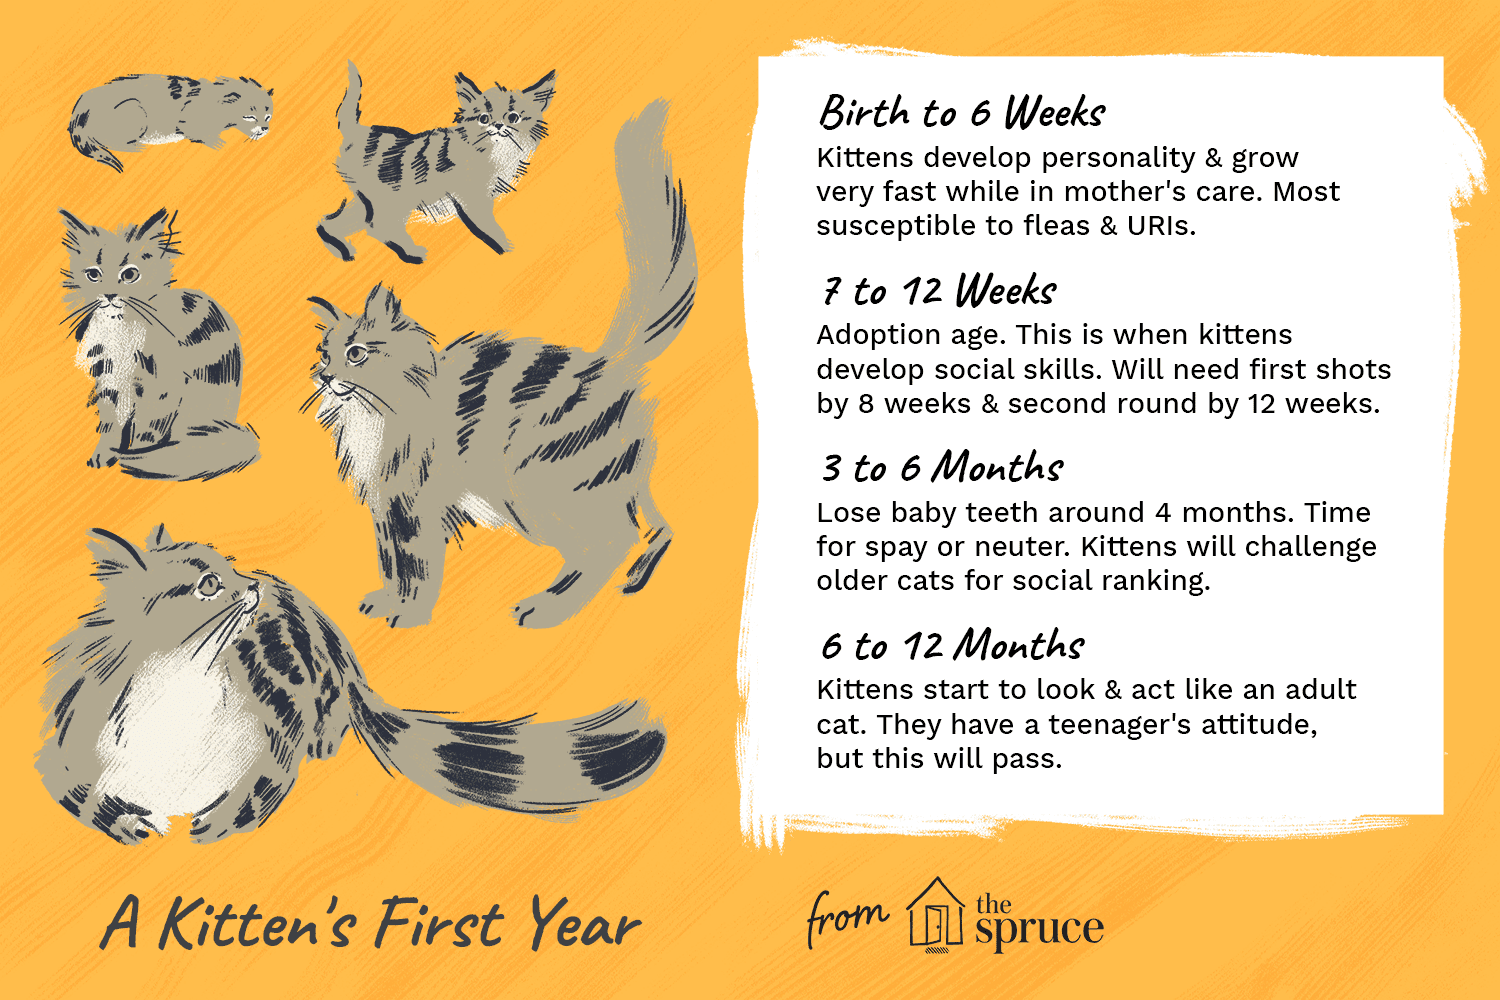 illustration of a kitten's first year as it develops